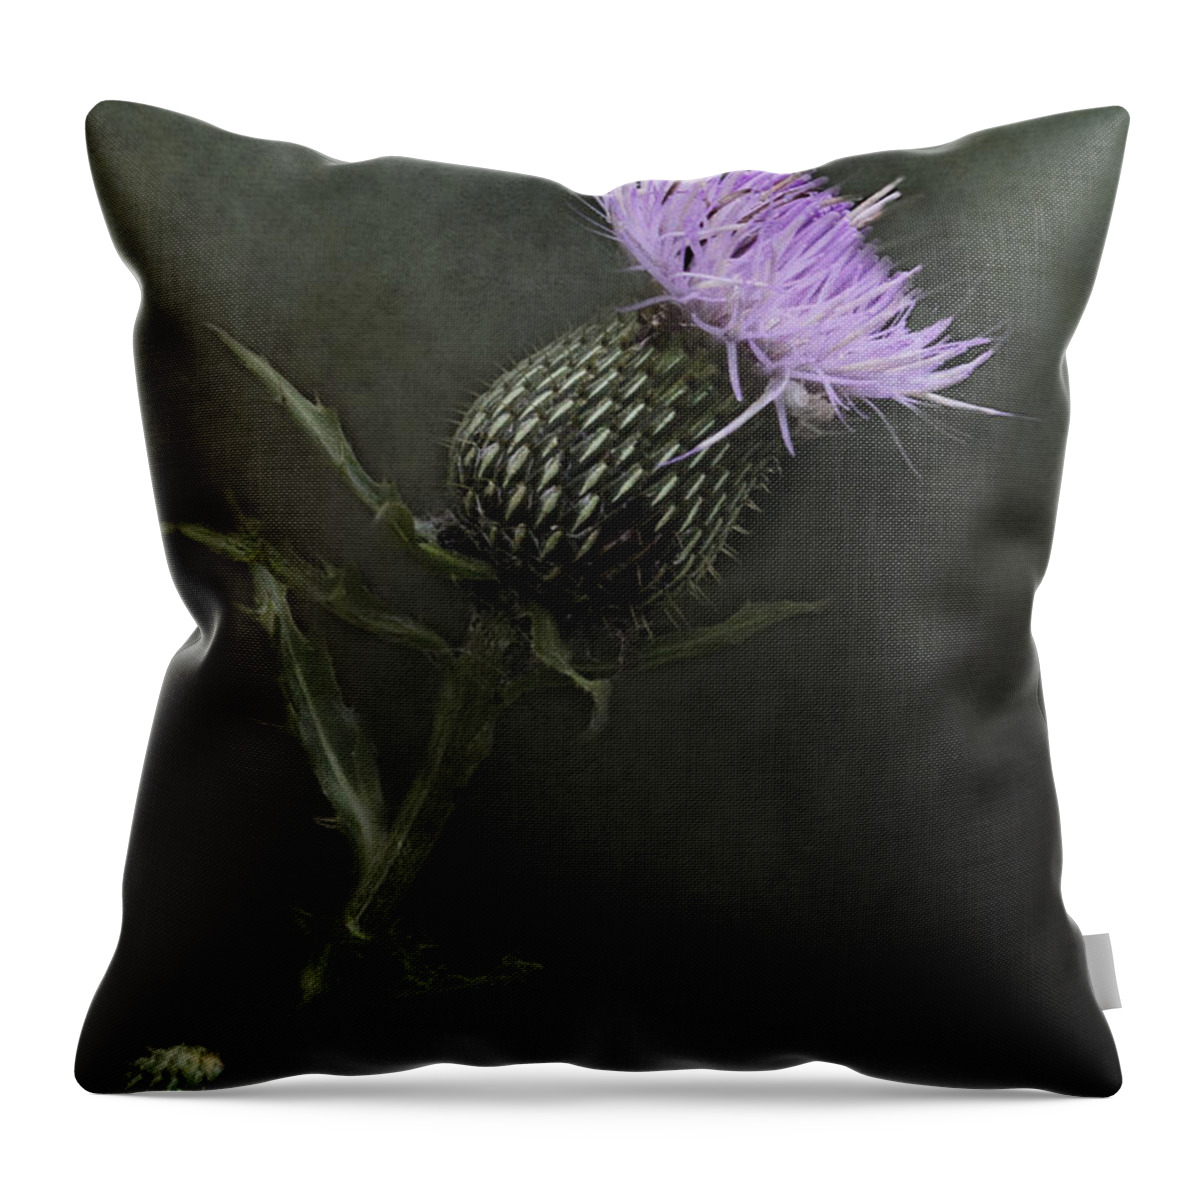 Thistle Throw Pillow featuring the photograph Bull Thistle Bloom by Pam Holdsworth